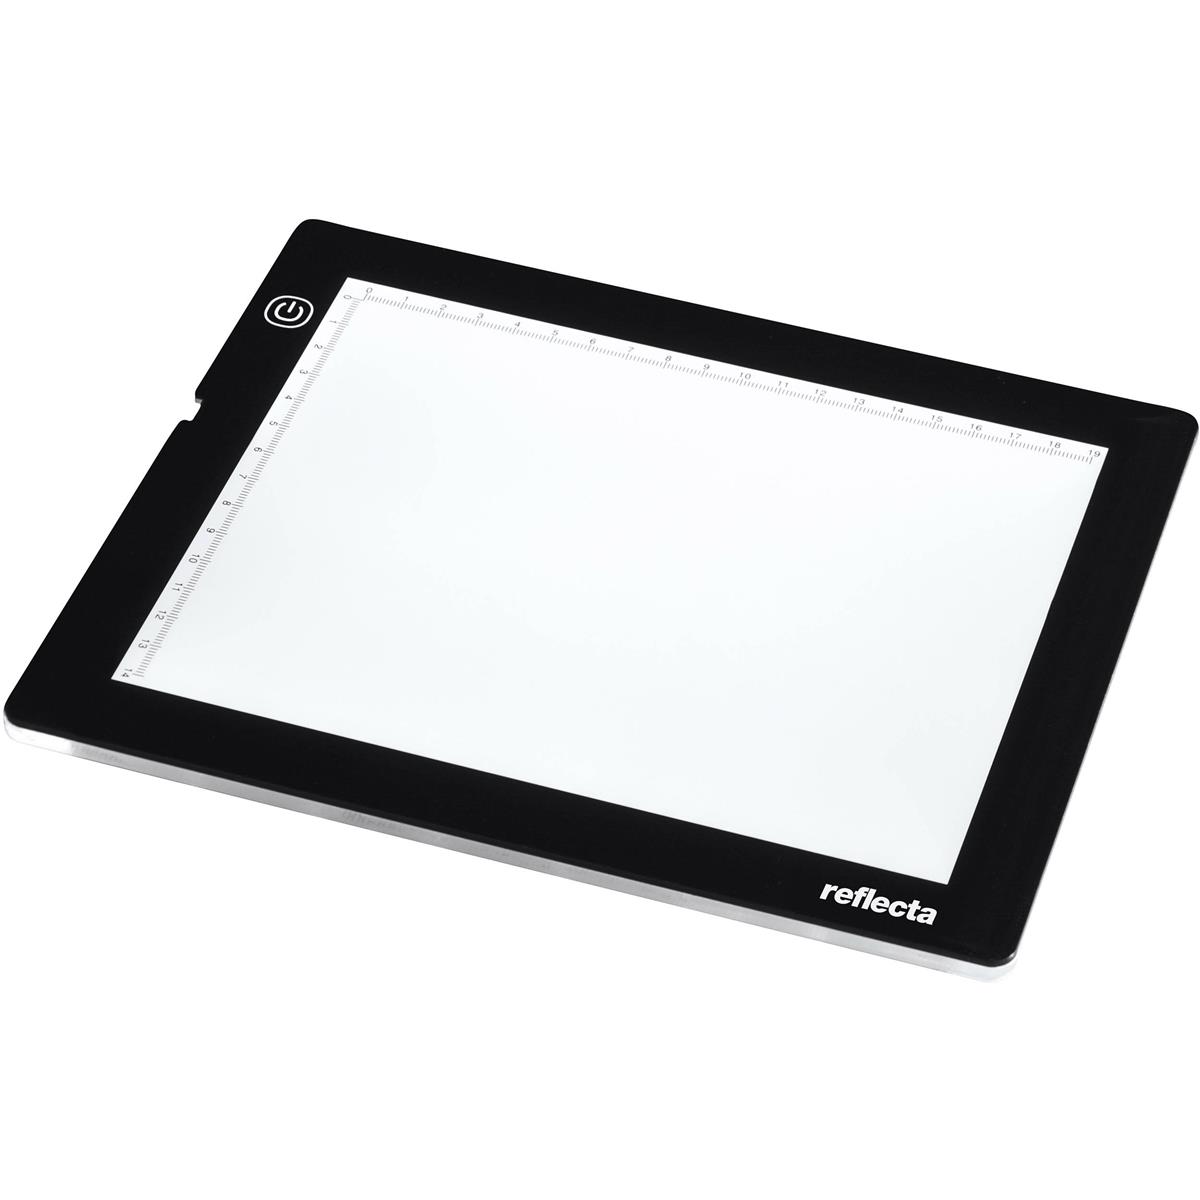 Photos - Other for studios Reflecta A5 Super Slim LED Light Pad, 5.5x7.5" 10318 